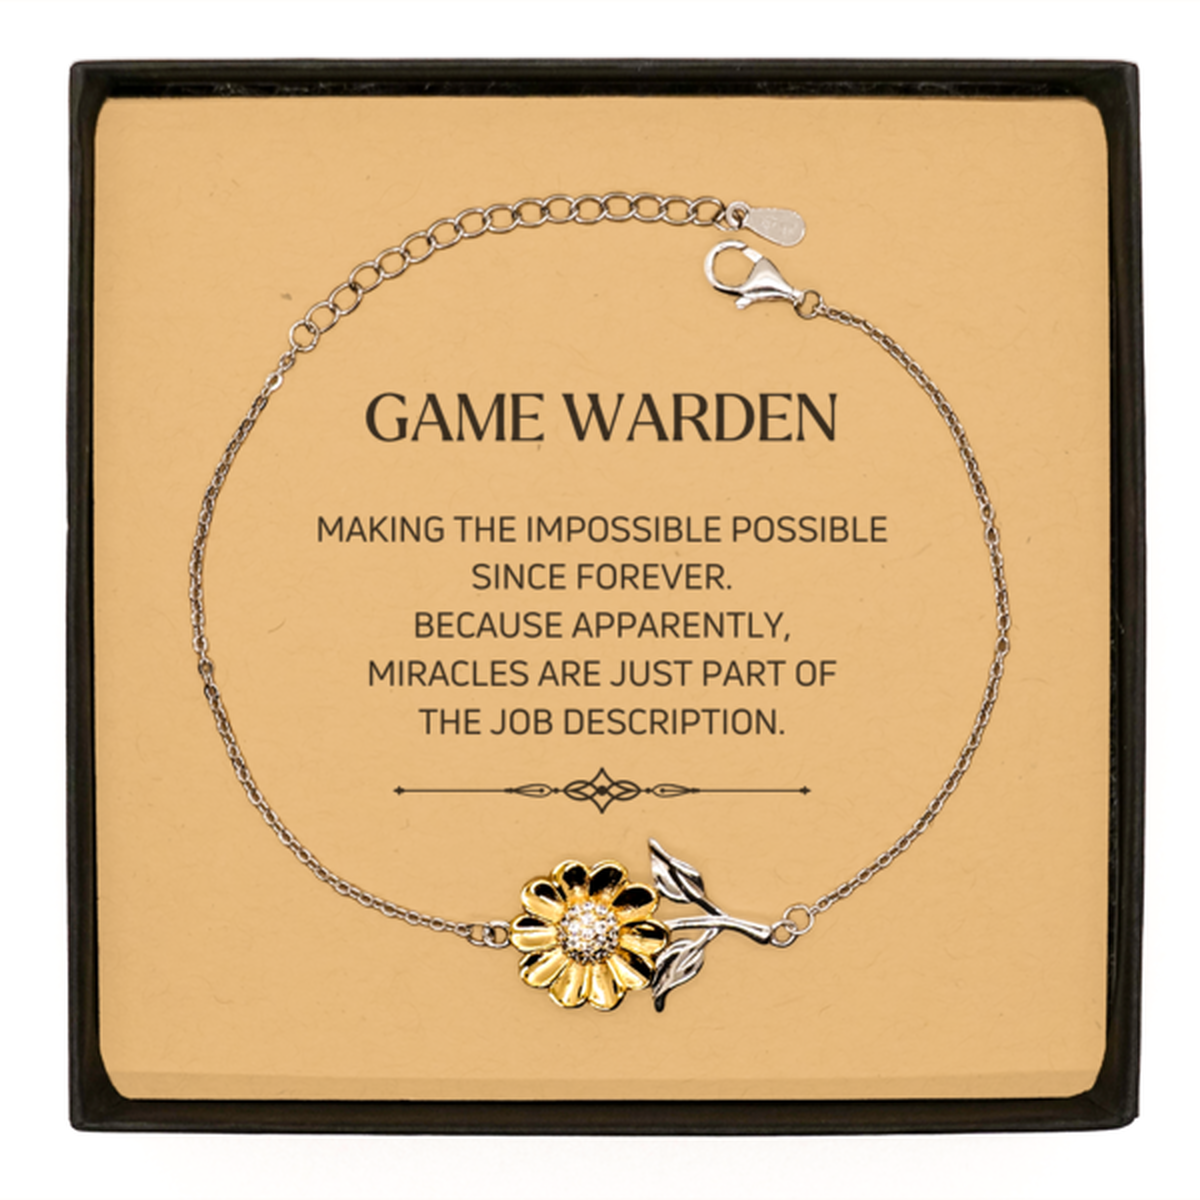 Funny Game Warden Gifts, Miracles are just part of the job description, Inspirational Birthday Sunflower Bracelet For Game Warden, Men, Women, Coworkers, Friends, Boss